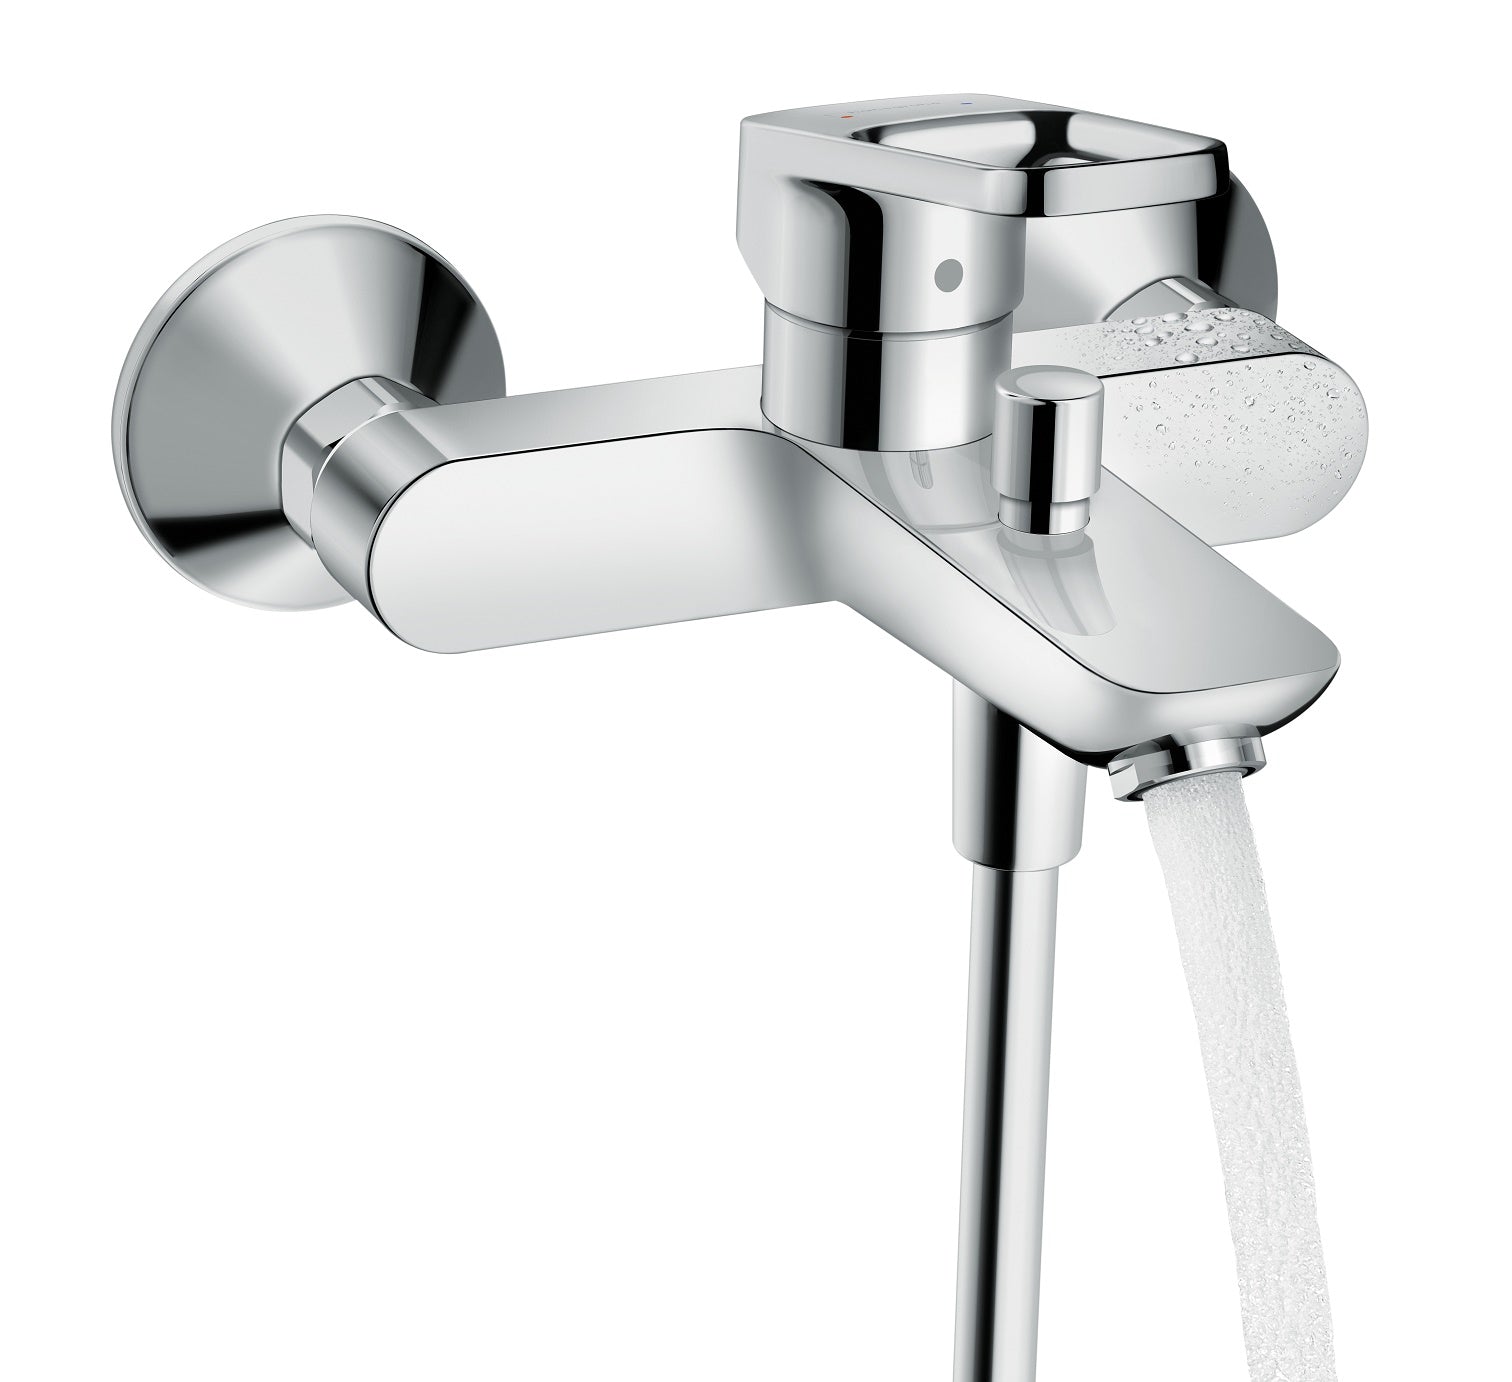 Logis Loop Bath Mixer - Premium Showers from Hansgrohe - Just GHS1495! Shop now at Kimo in Ghana